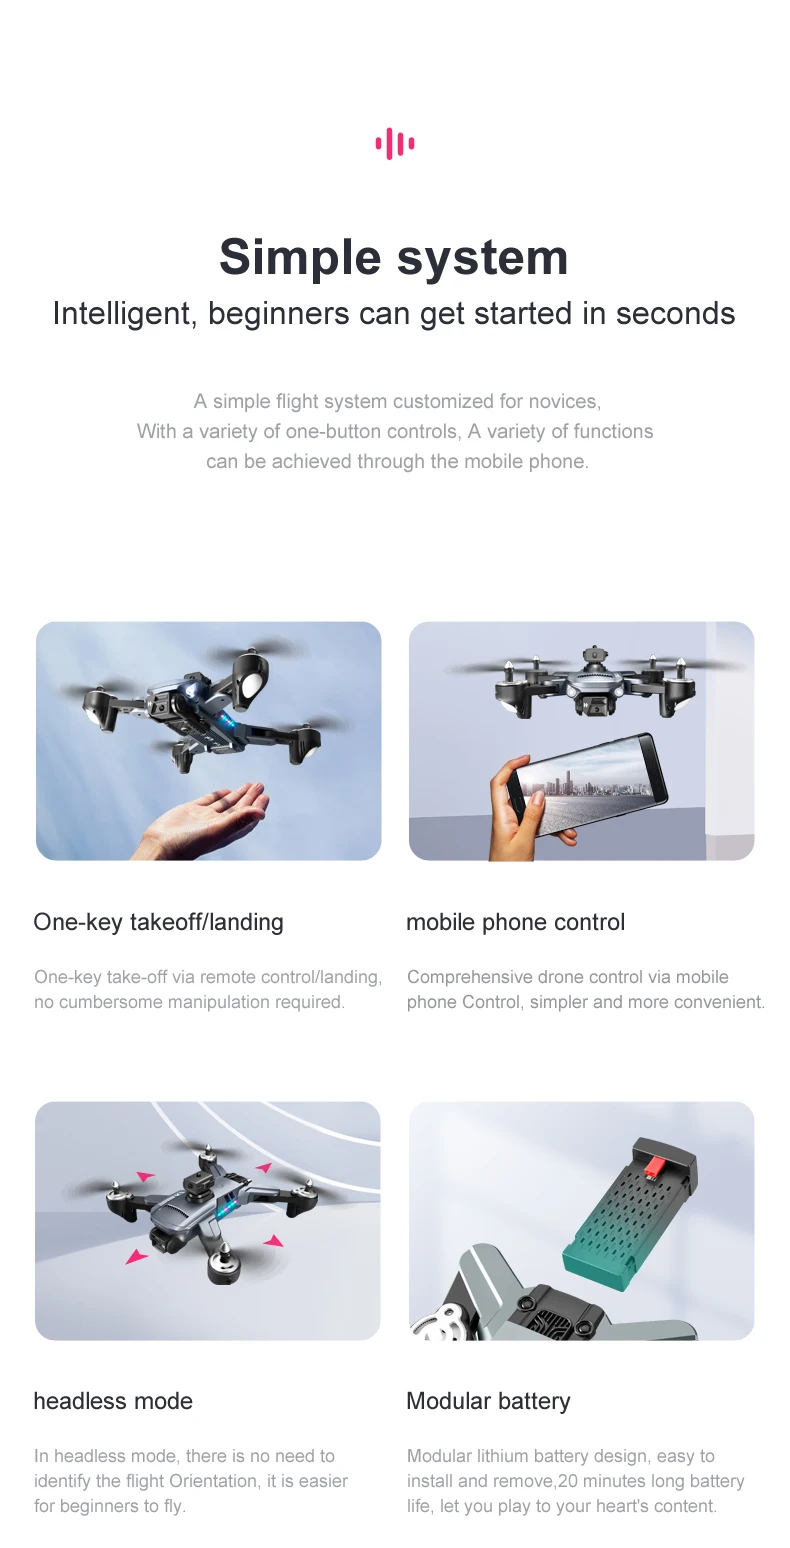 K7 Drone, simple flight system customized for novices with a variety of one-